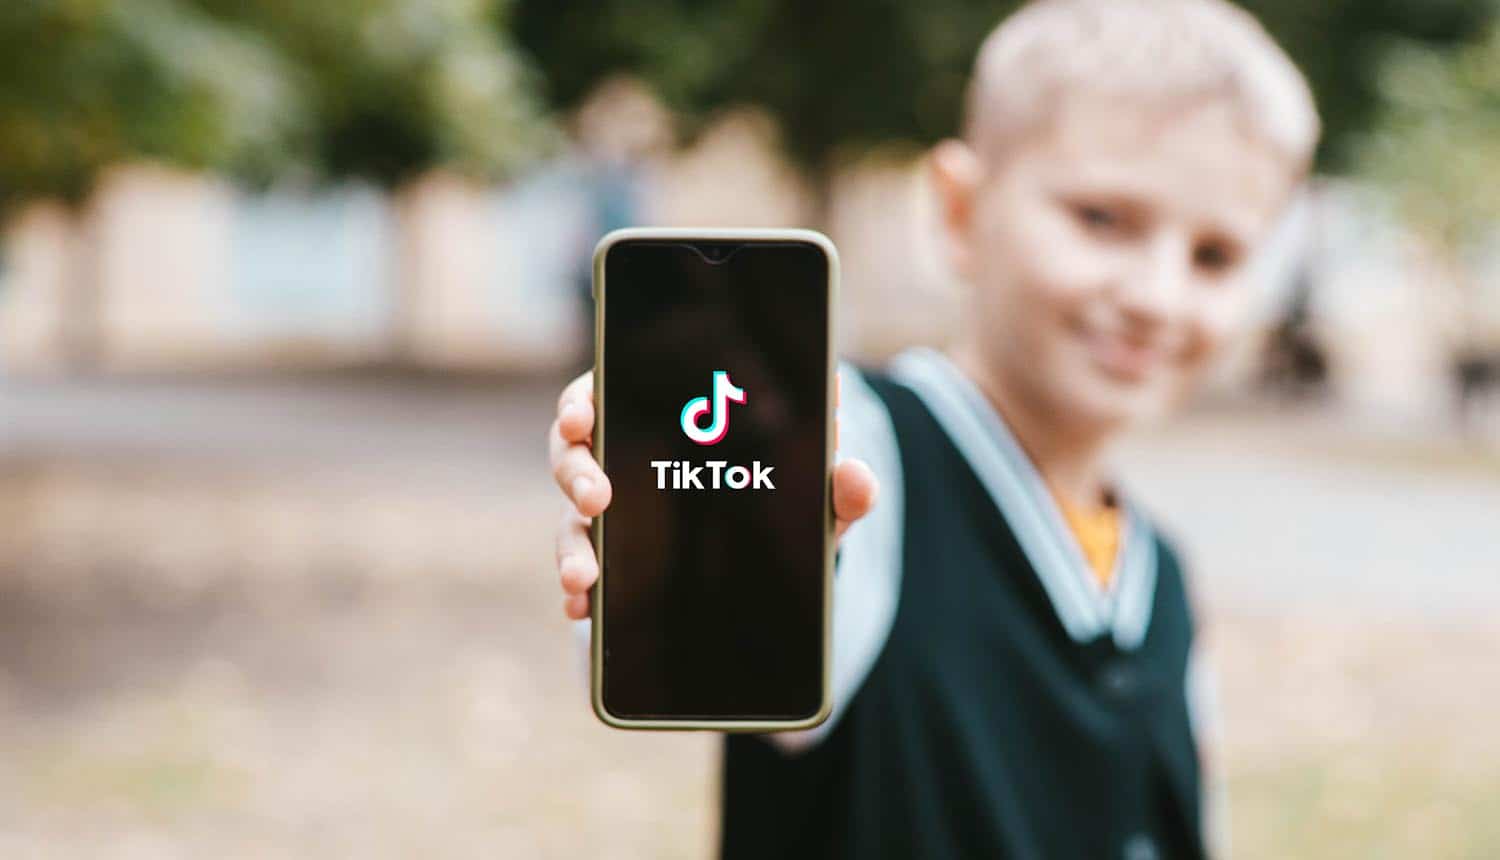 Tiktok faces lawsuits over allegations of deceptively targeting teens